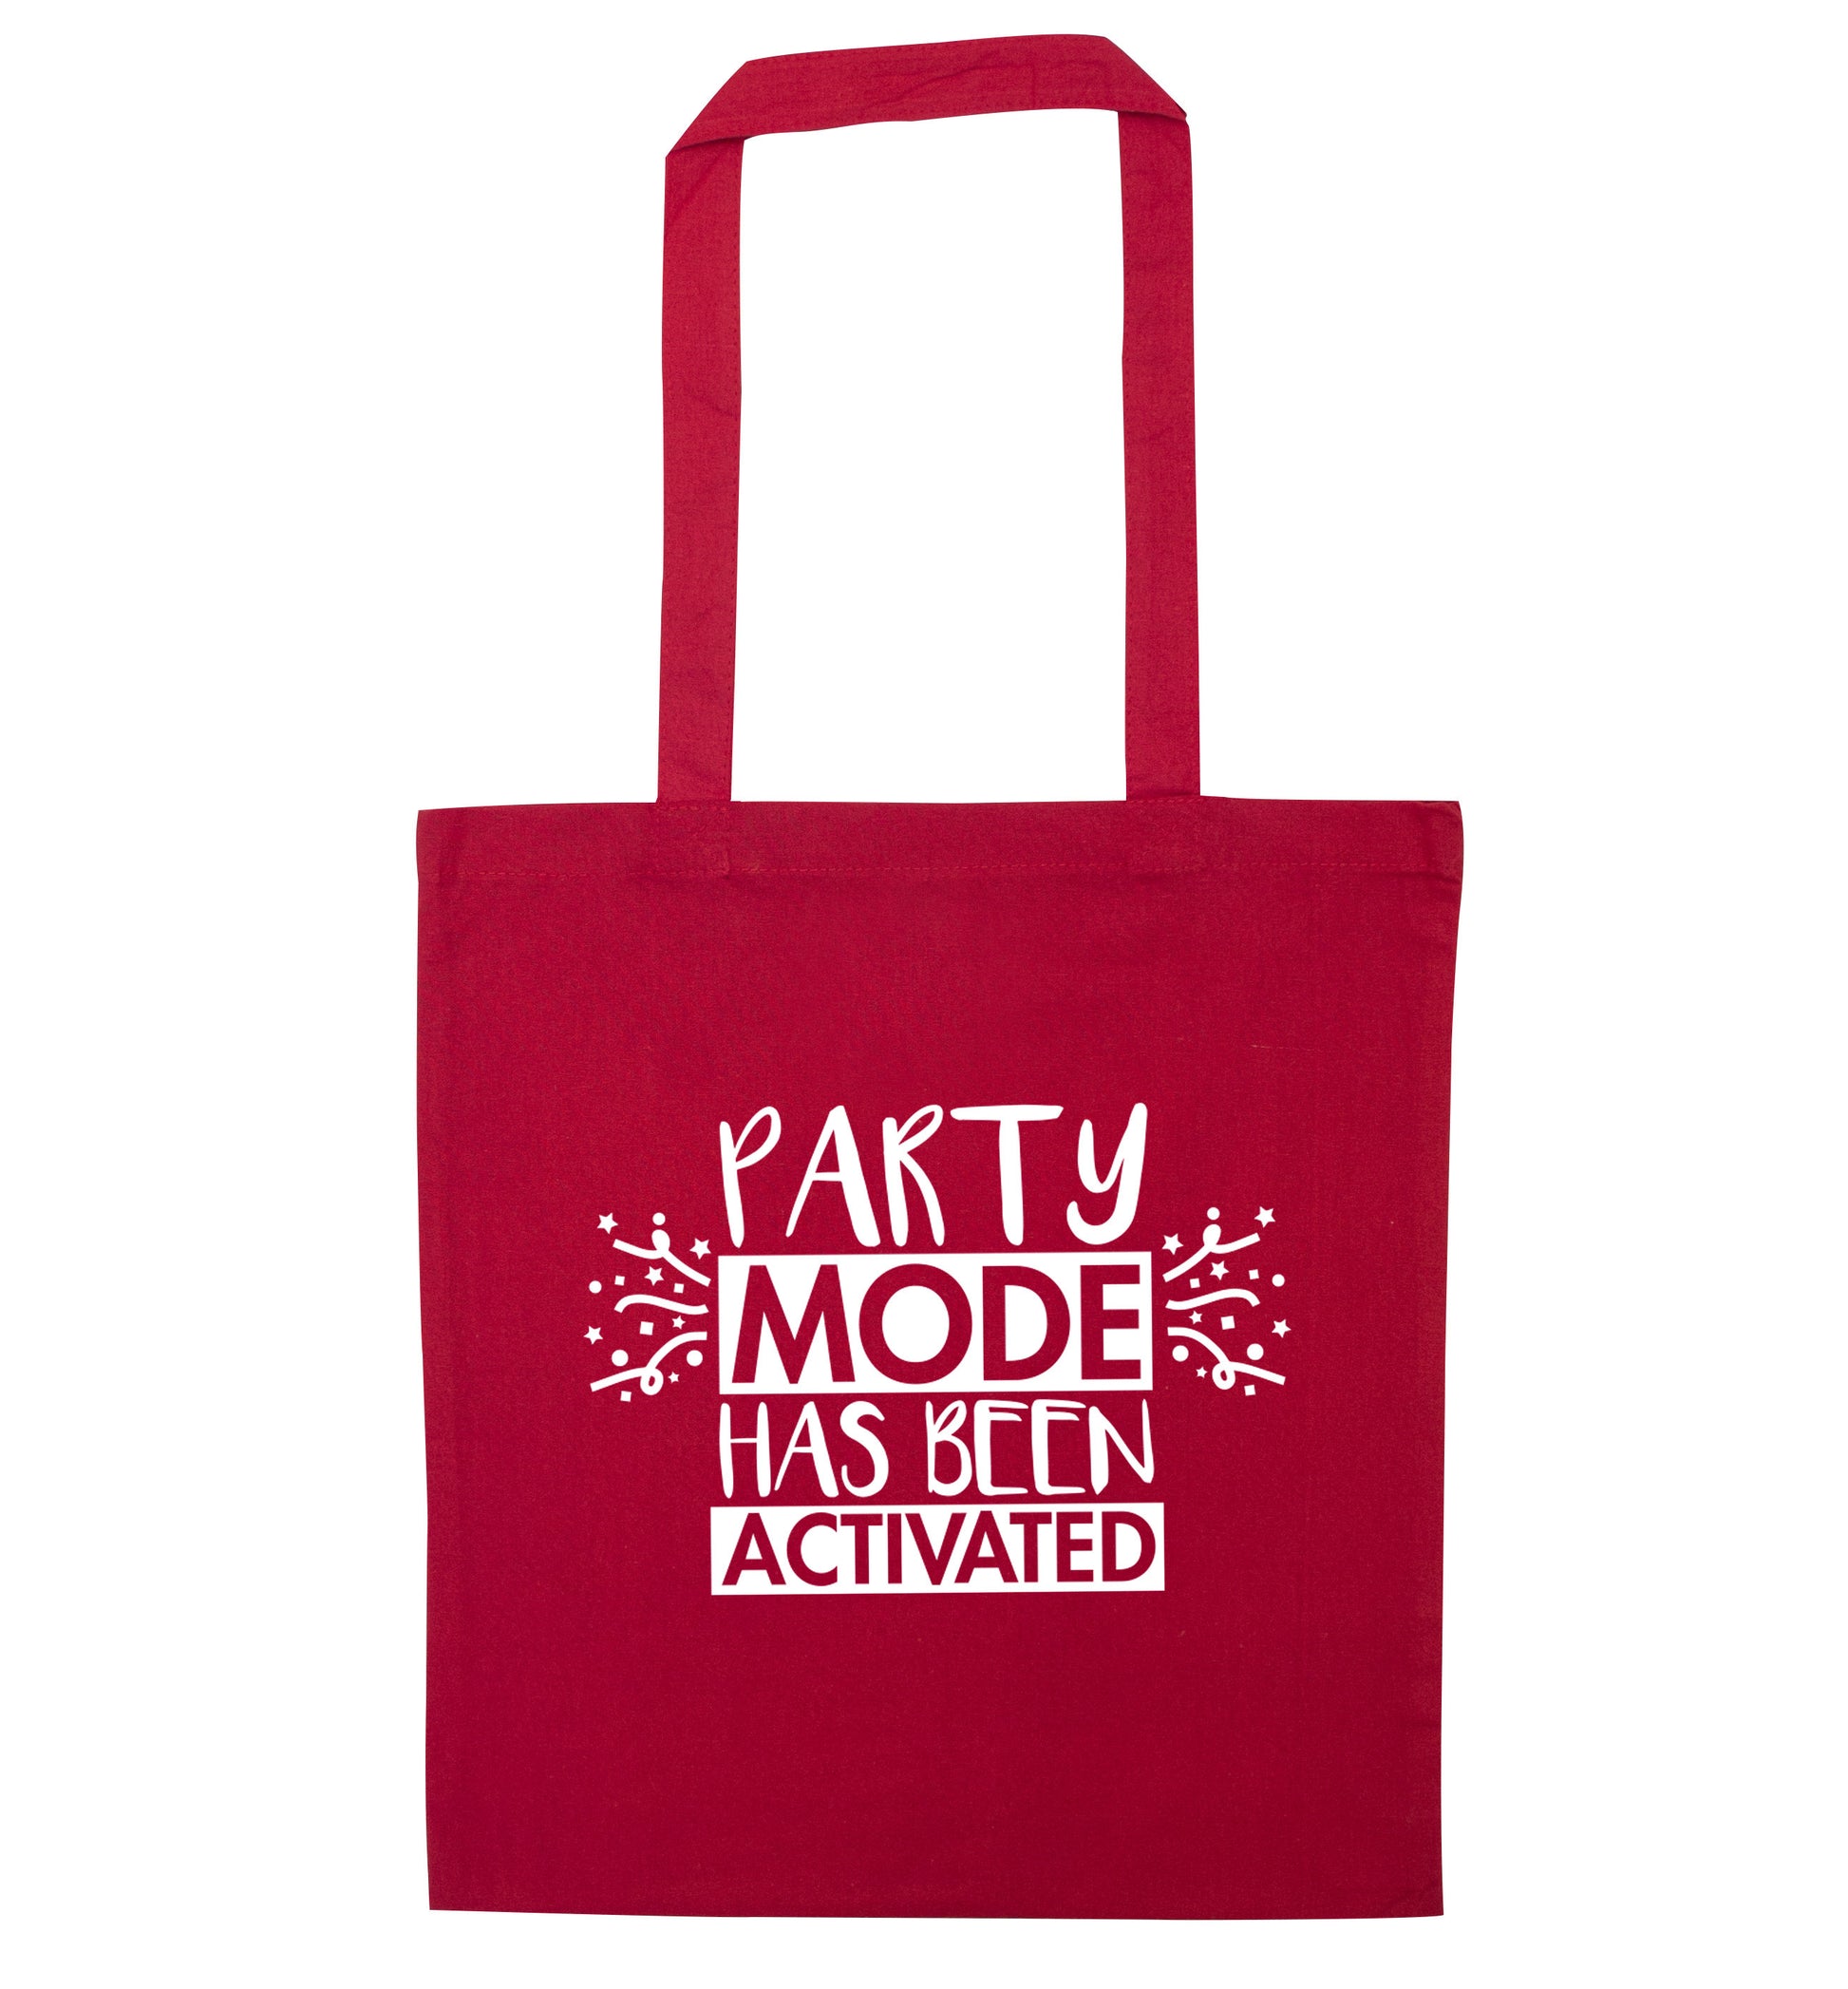 Please do not disturb party mode has been activated red tote bag